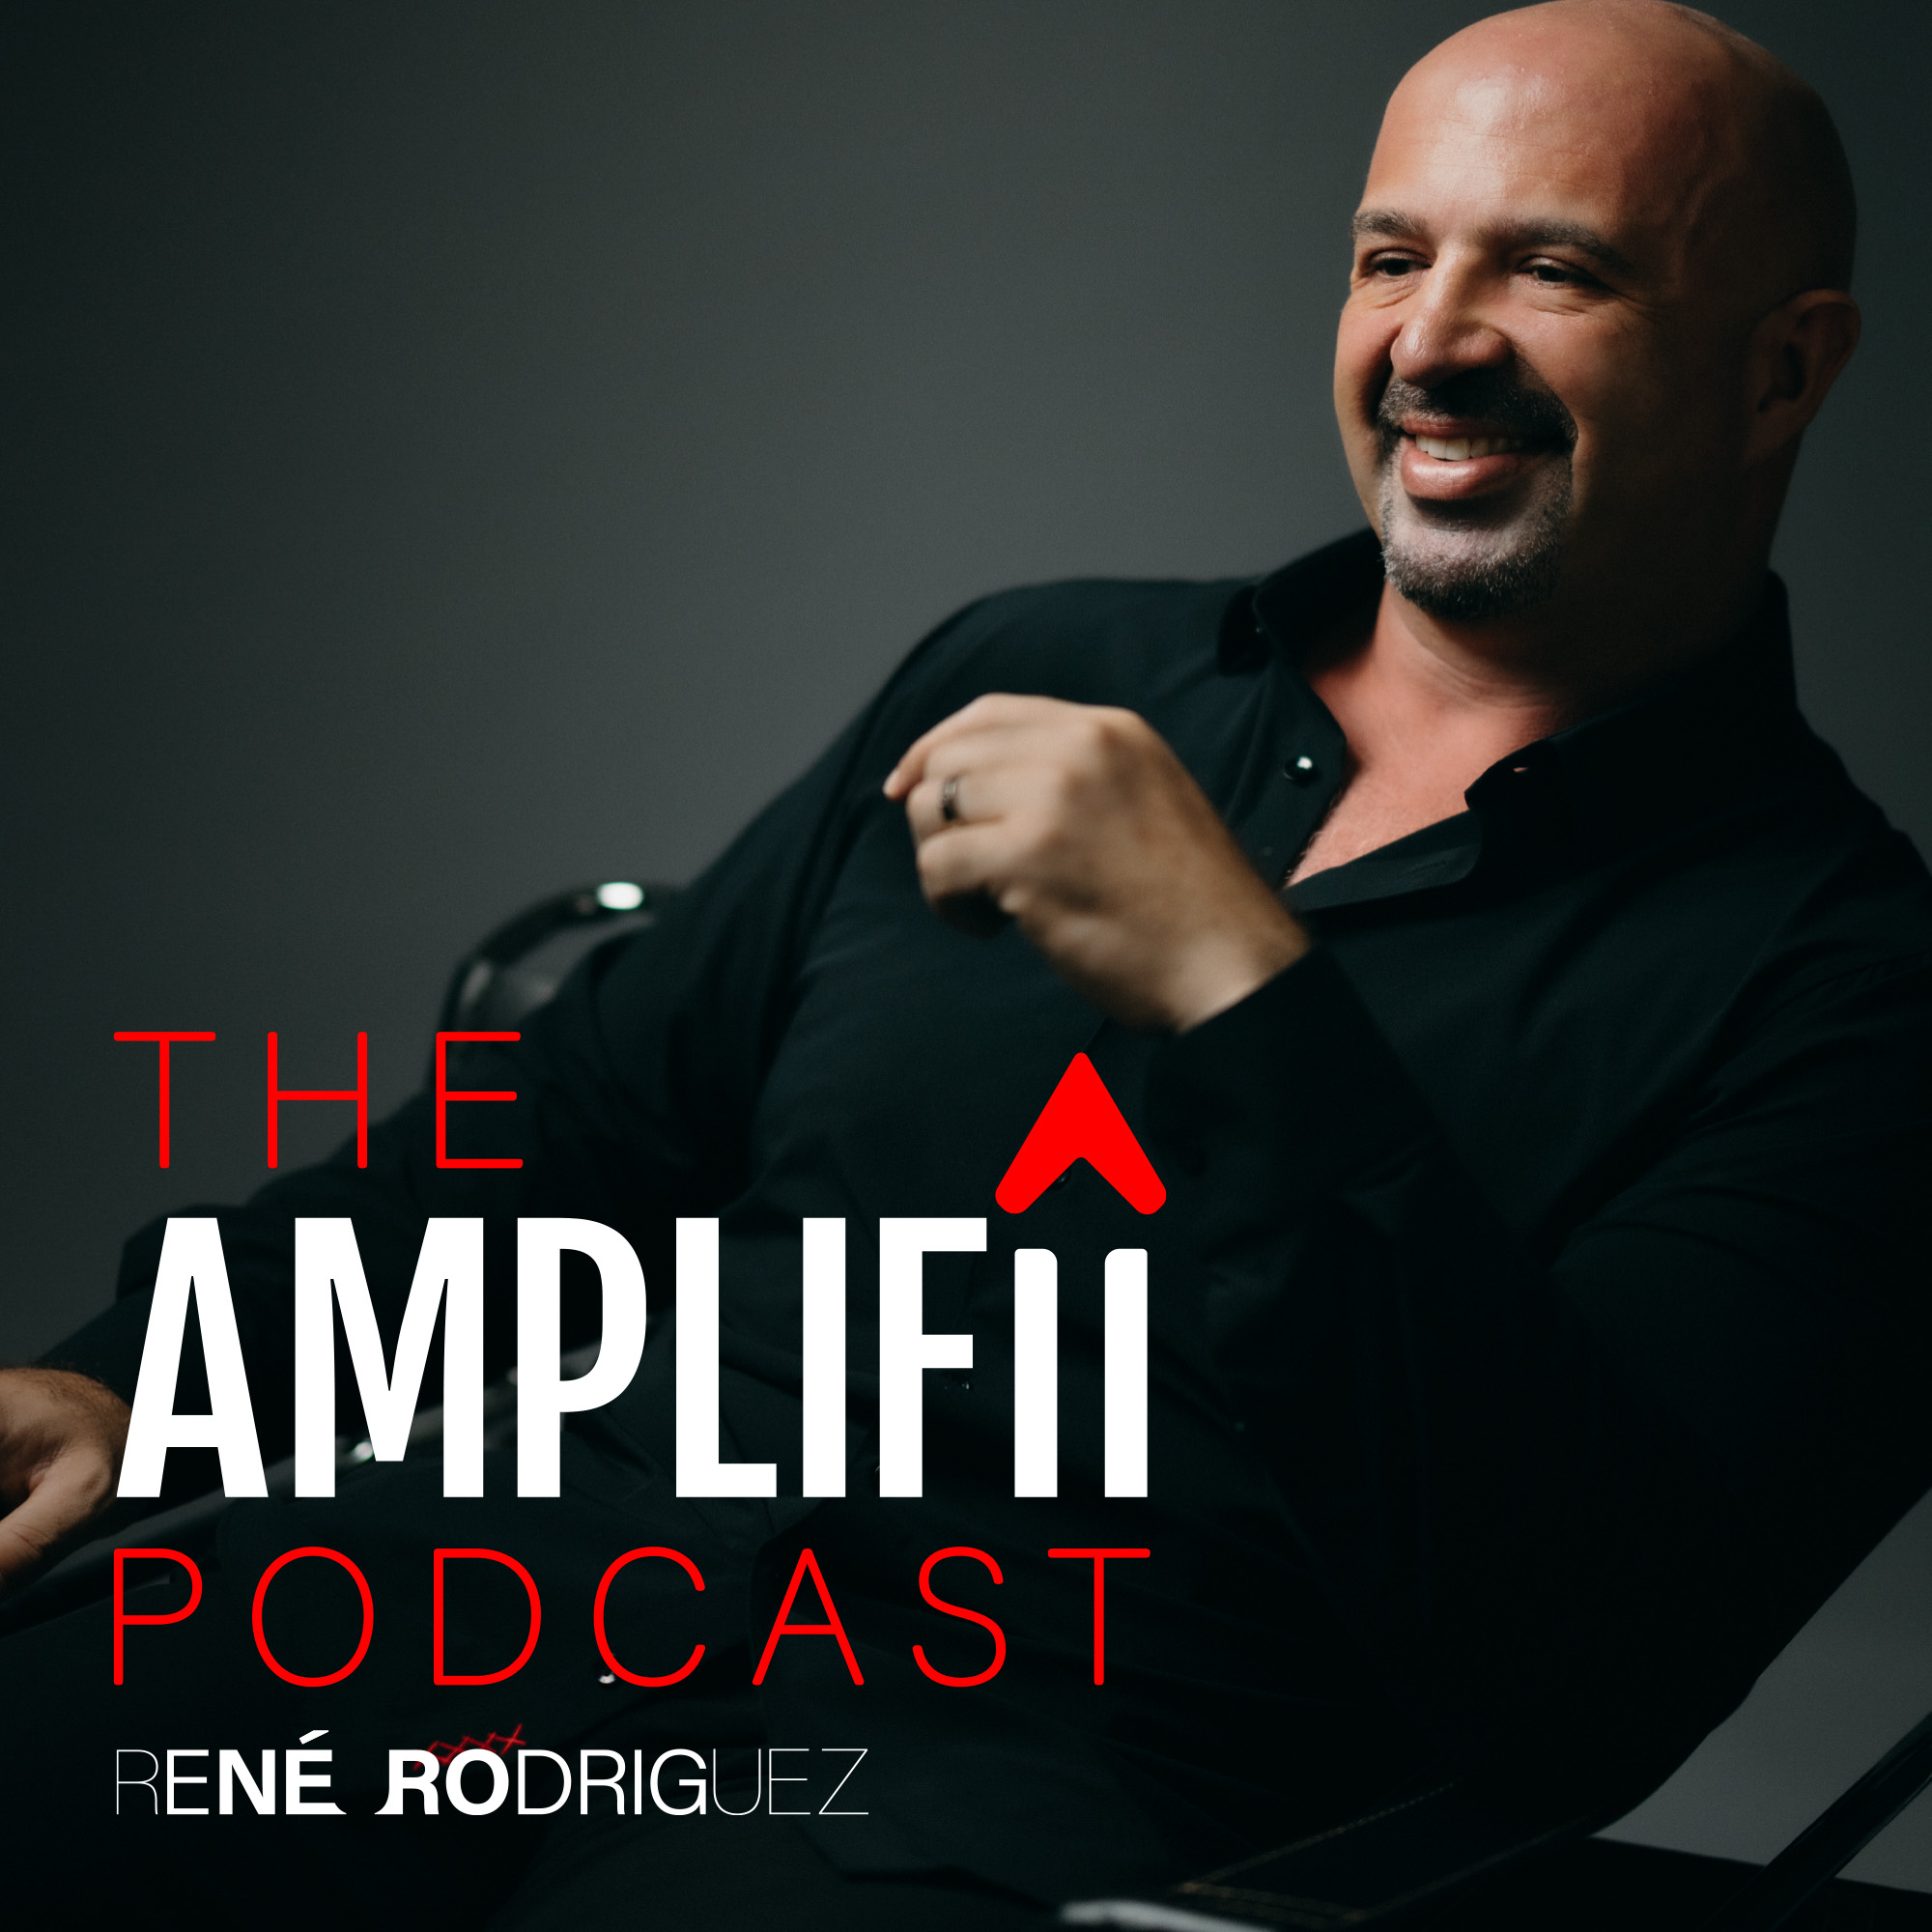 Show artwork for THE AMPLIFII PODCAST